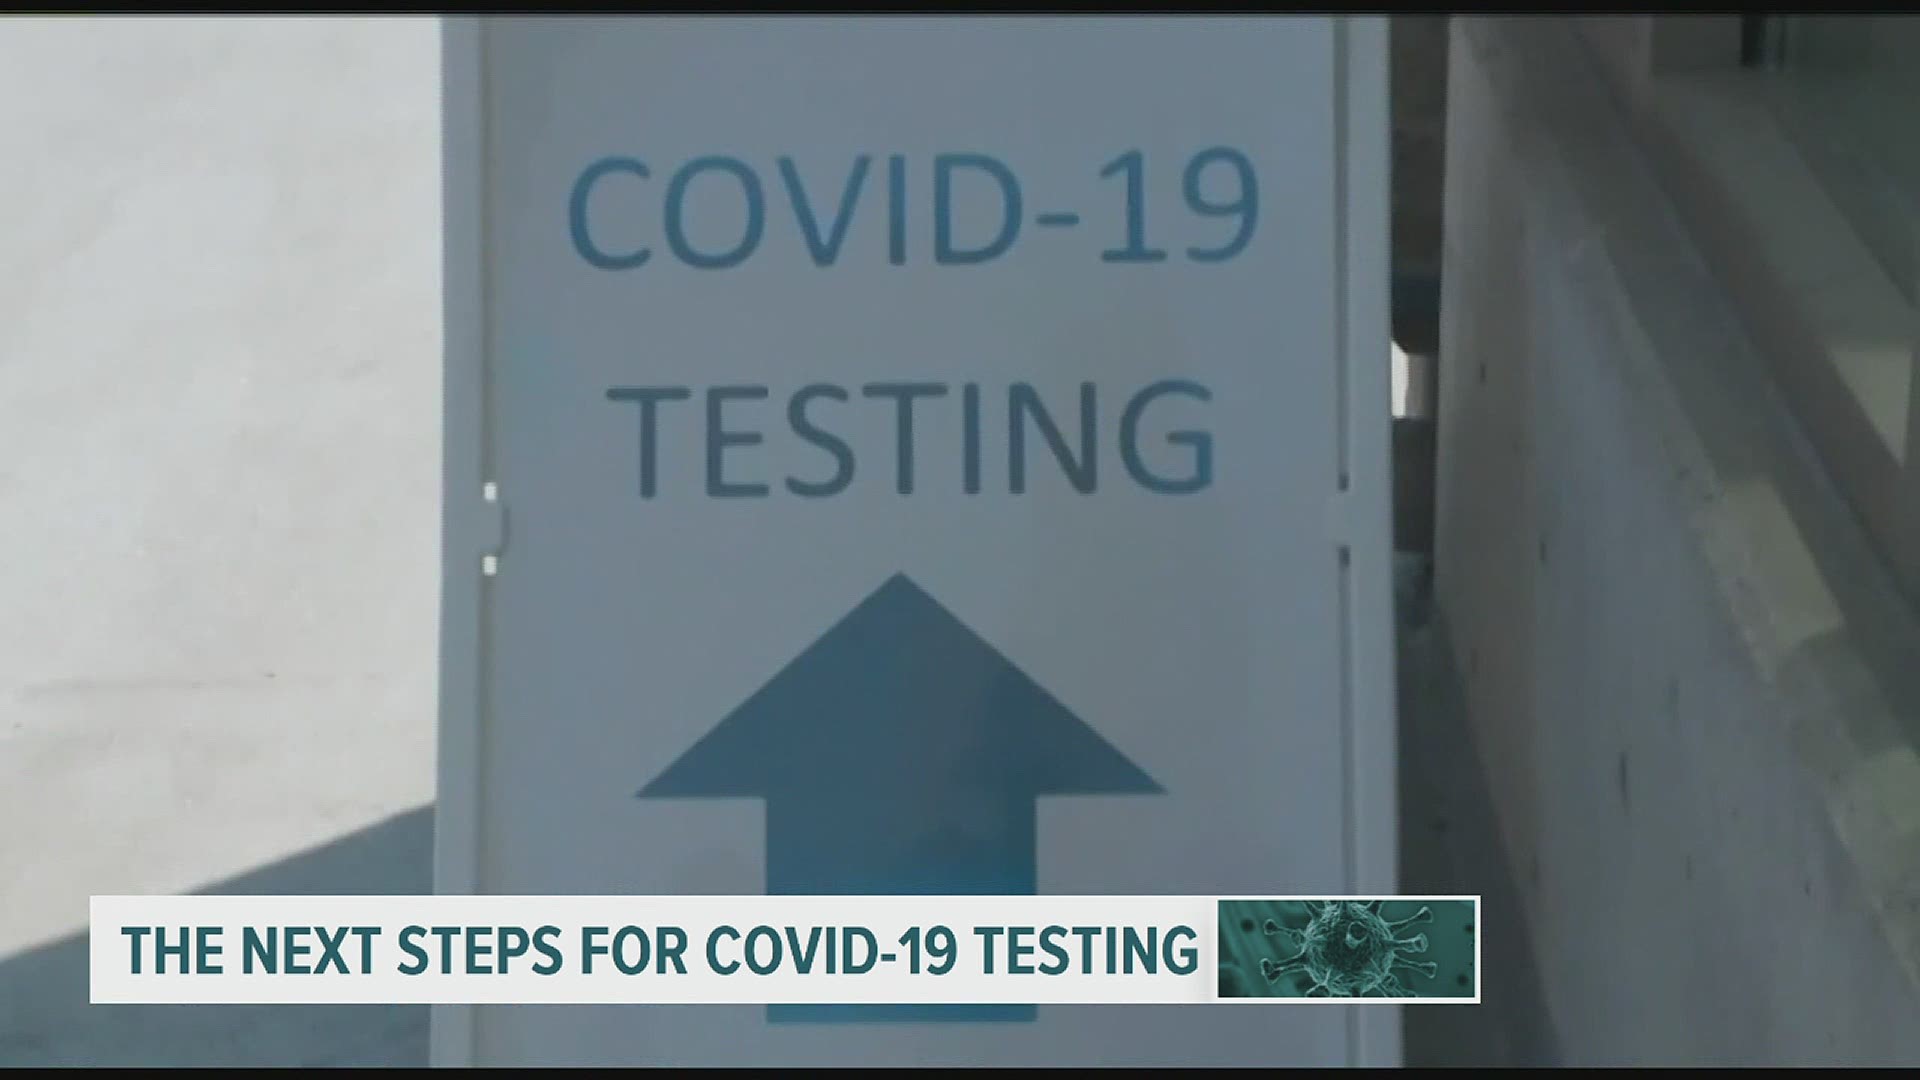 Health experts say surveillance testing will be considered for funding with the new COVID-19 emergency relief bill funds.